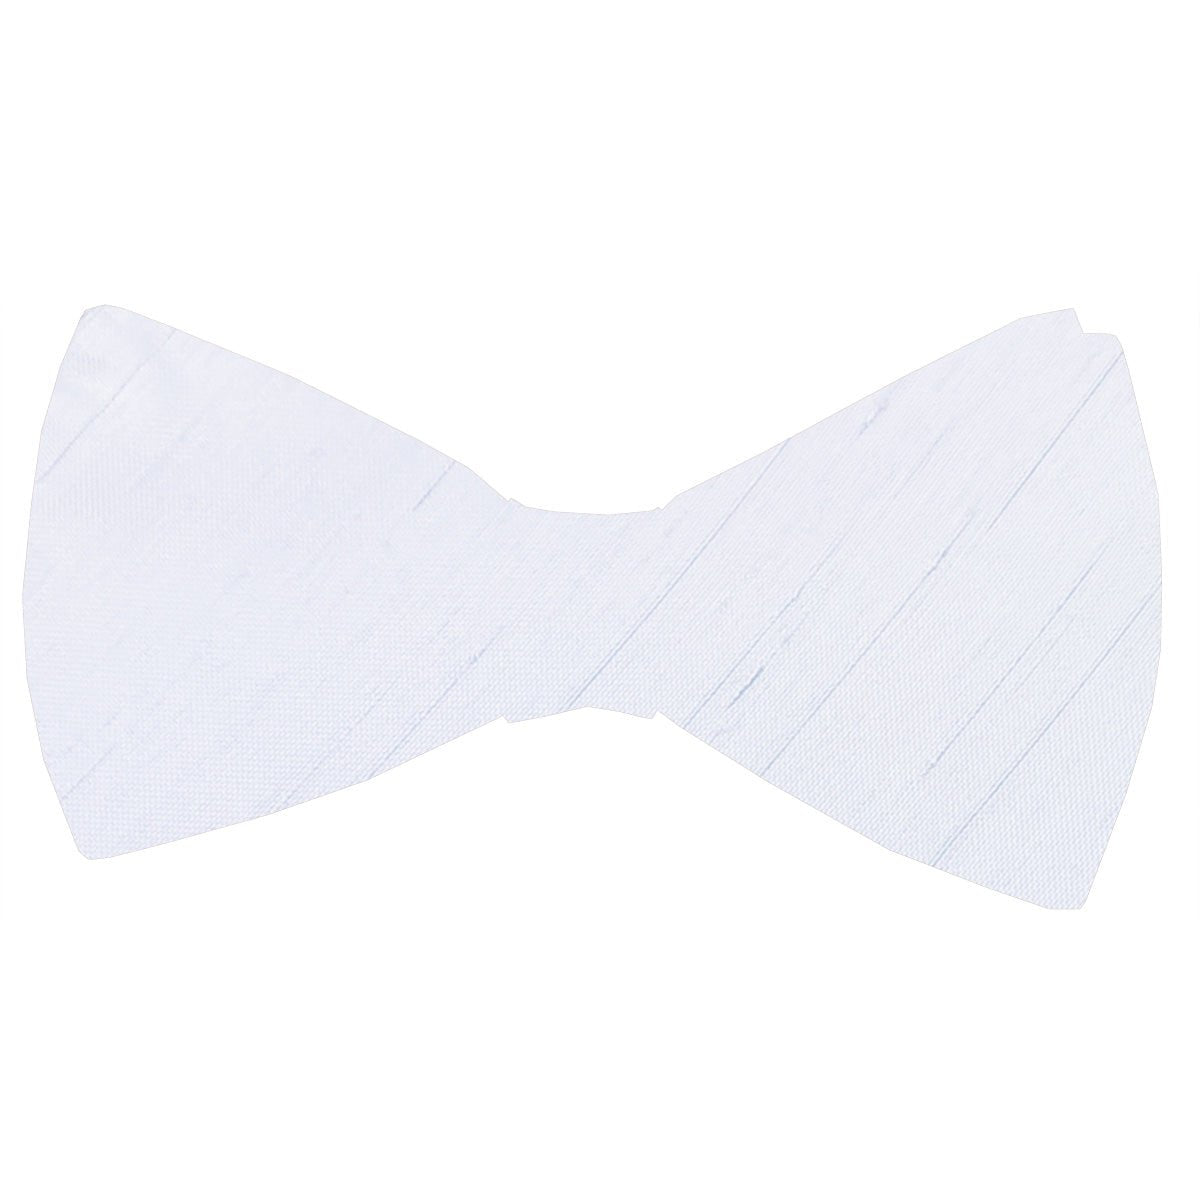 Celestial Blue Shantung Bow Tie - Wedding Bow Tie - Pre-Tied - Swagger & Swoon